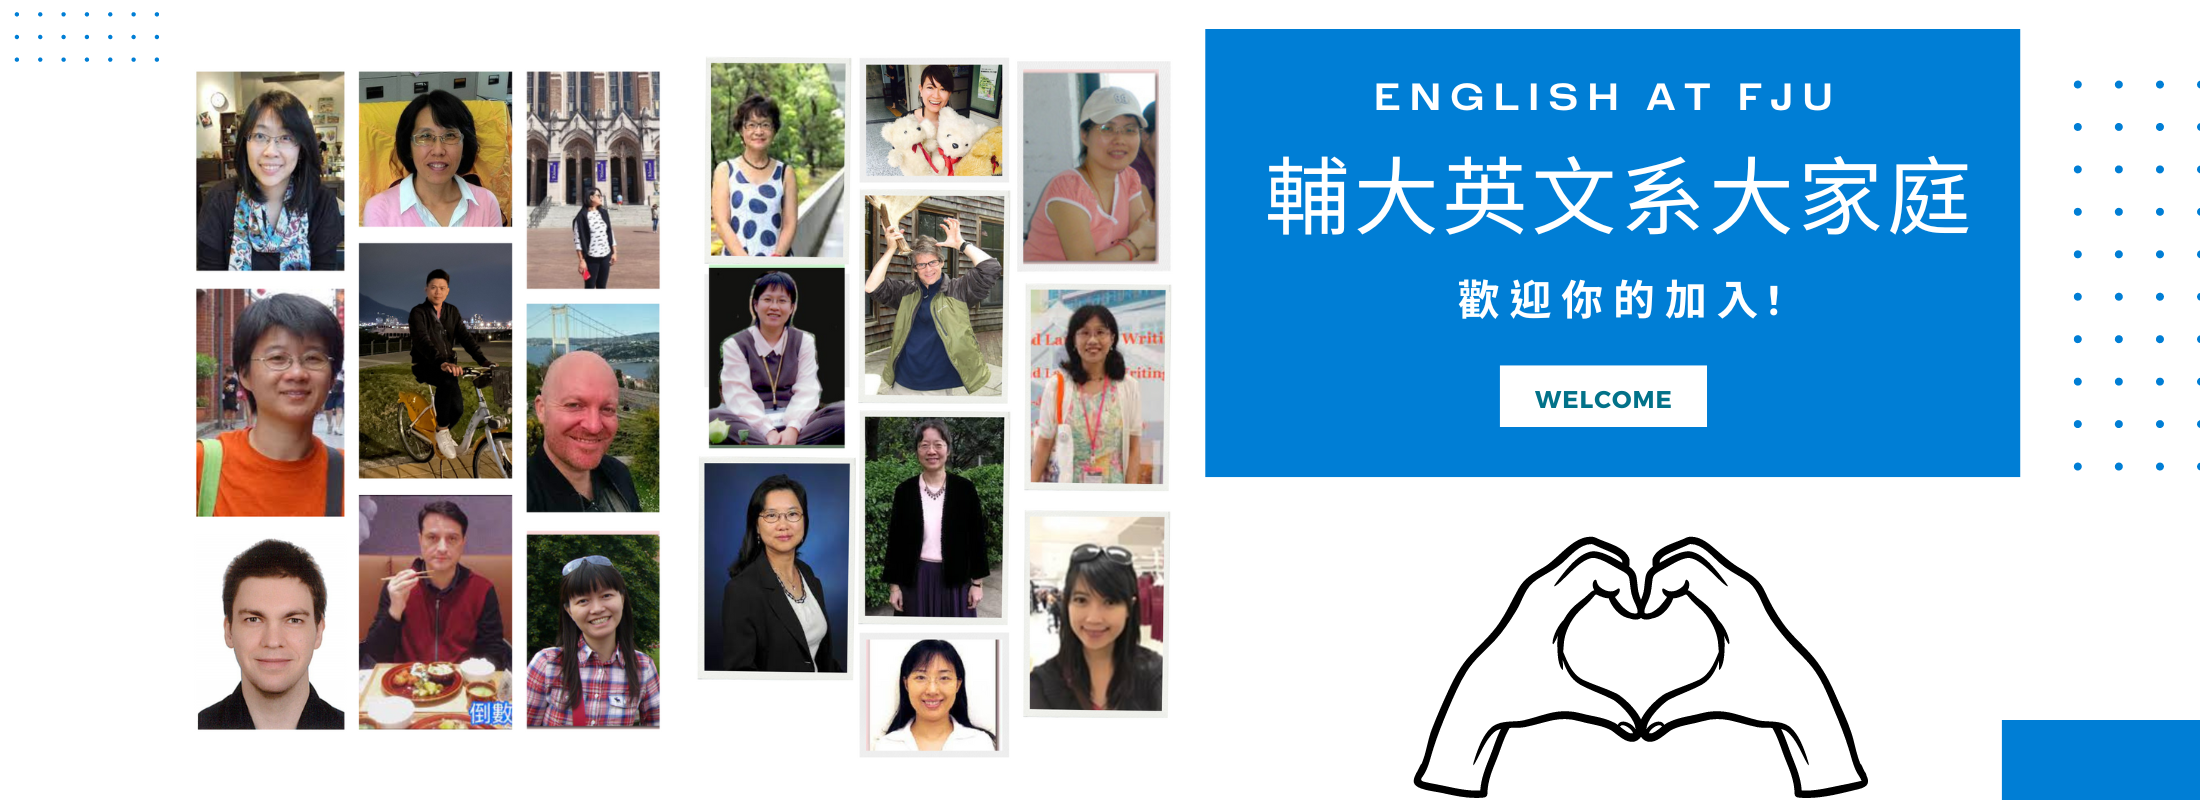 Welcome to English at FJU!